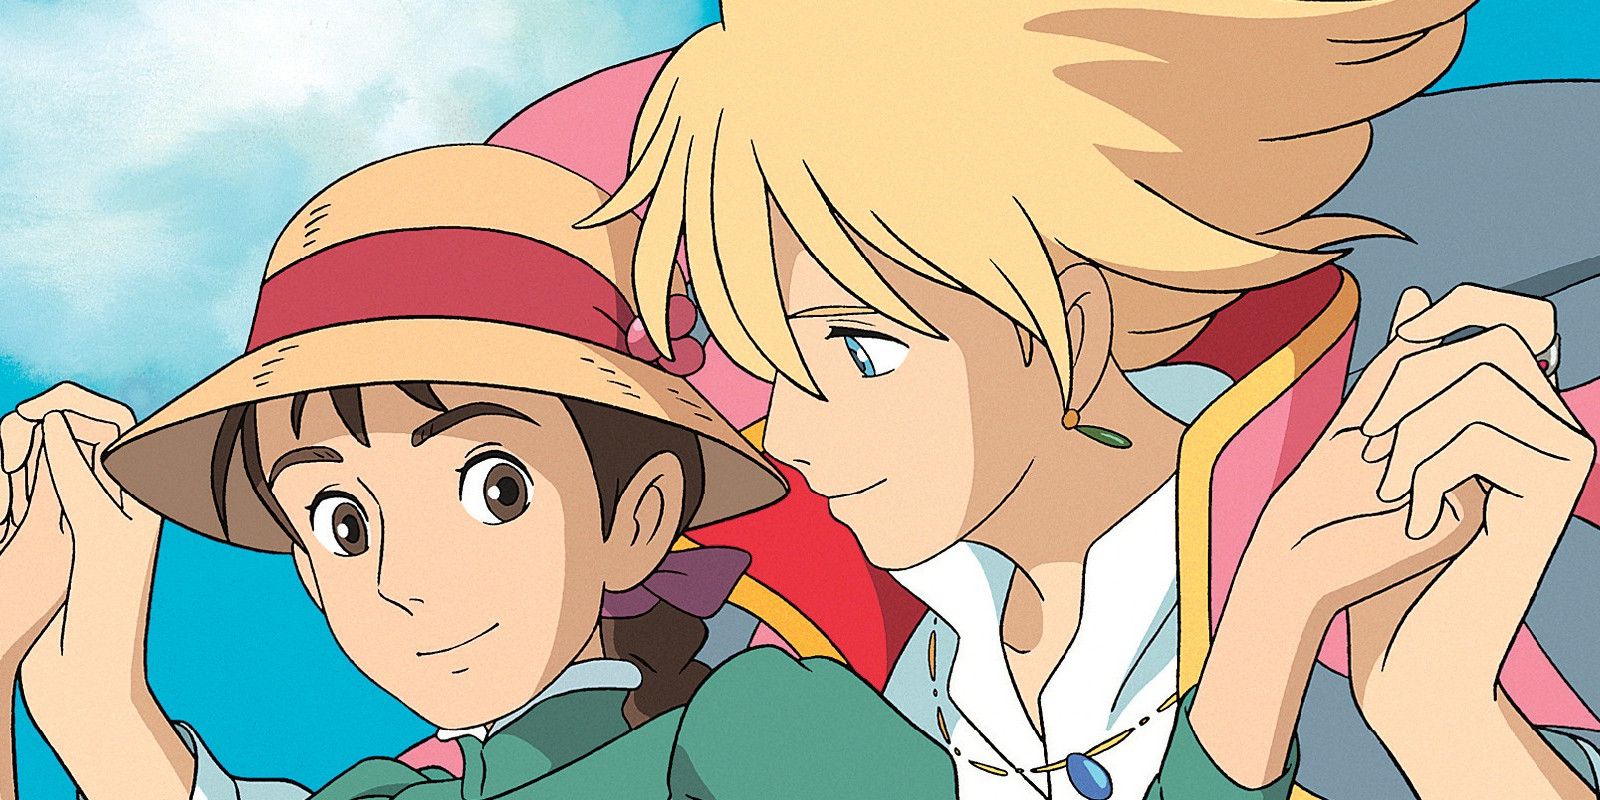 Young Sophie and blonde Howl and holding hands walking through the air from Howl’s Moving Castle.